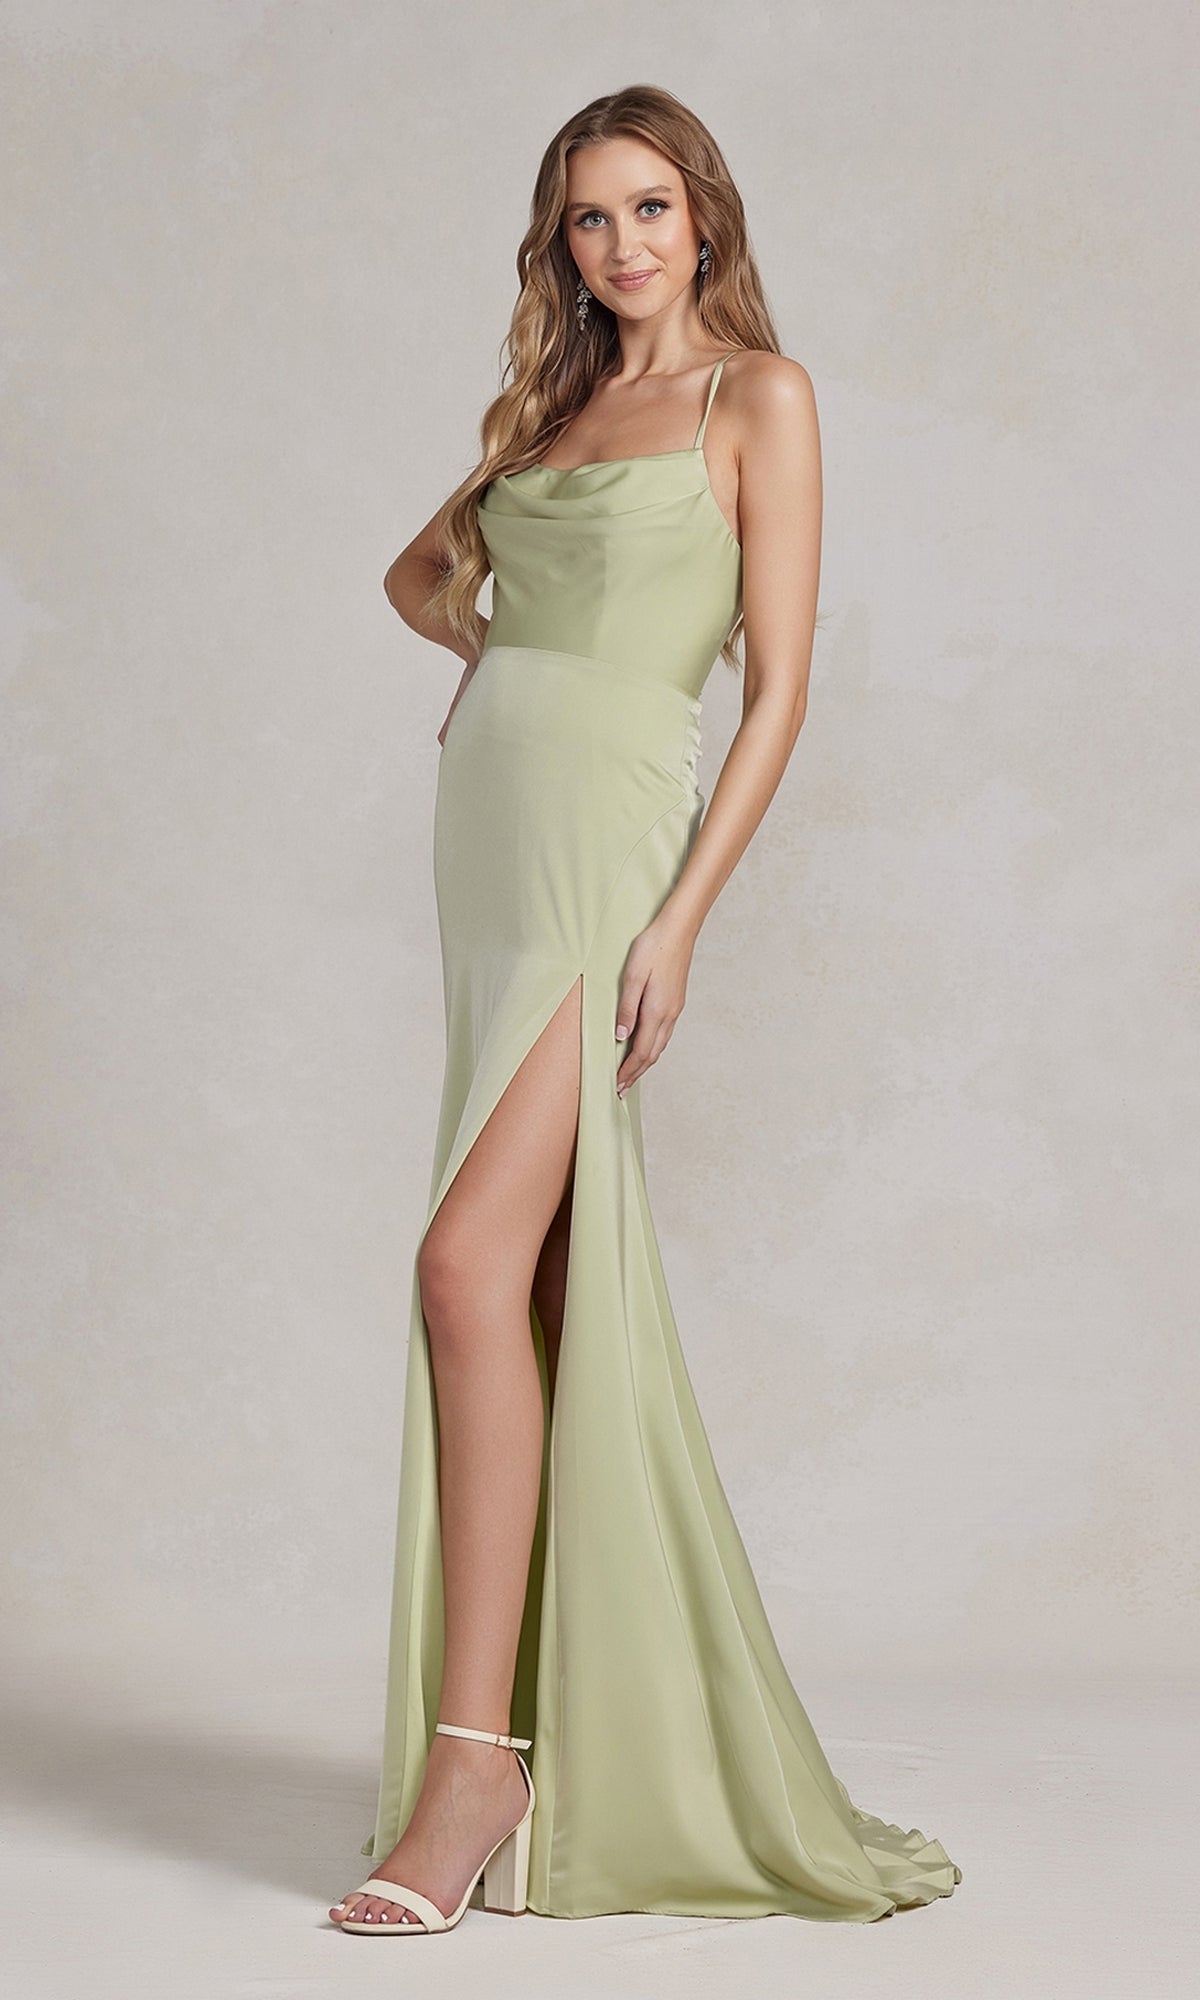 Cowl-Neck Classic Prom Dress with Side Slit